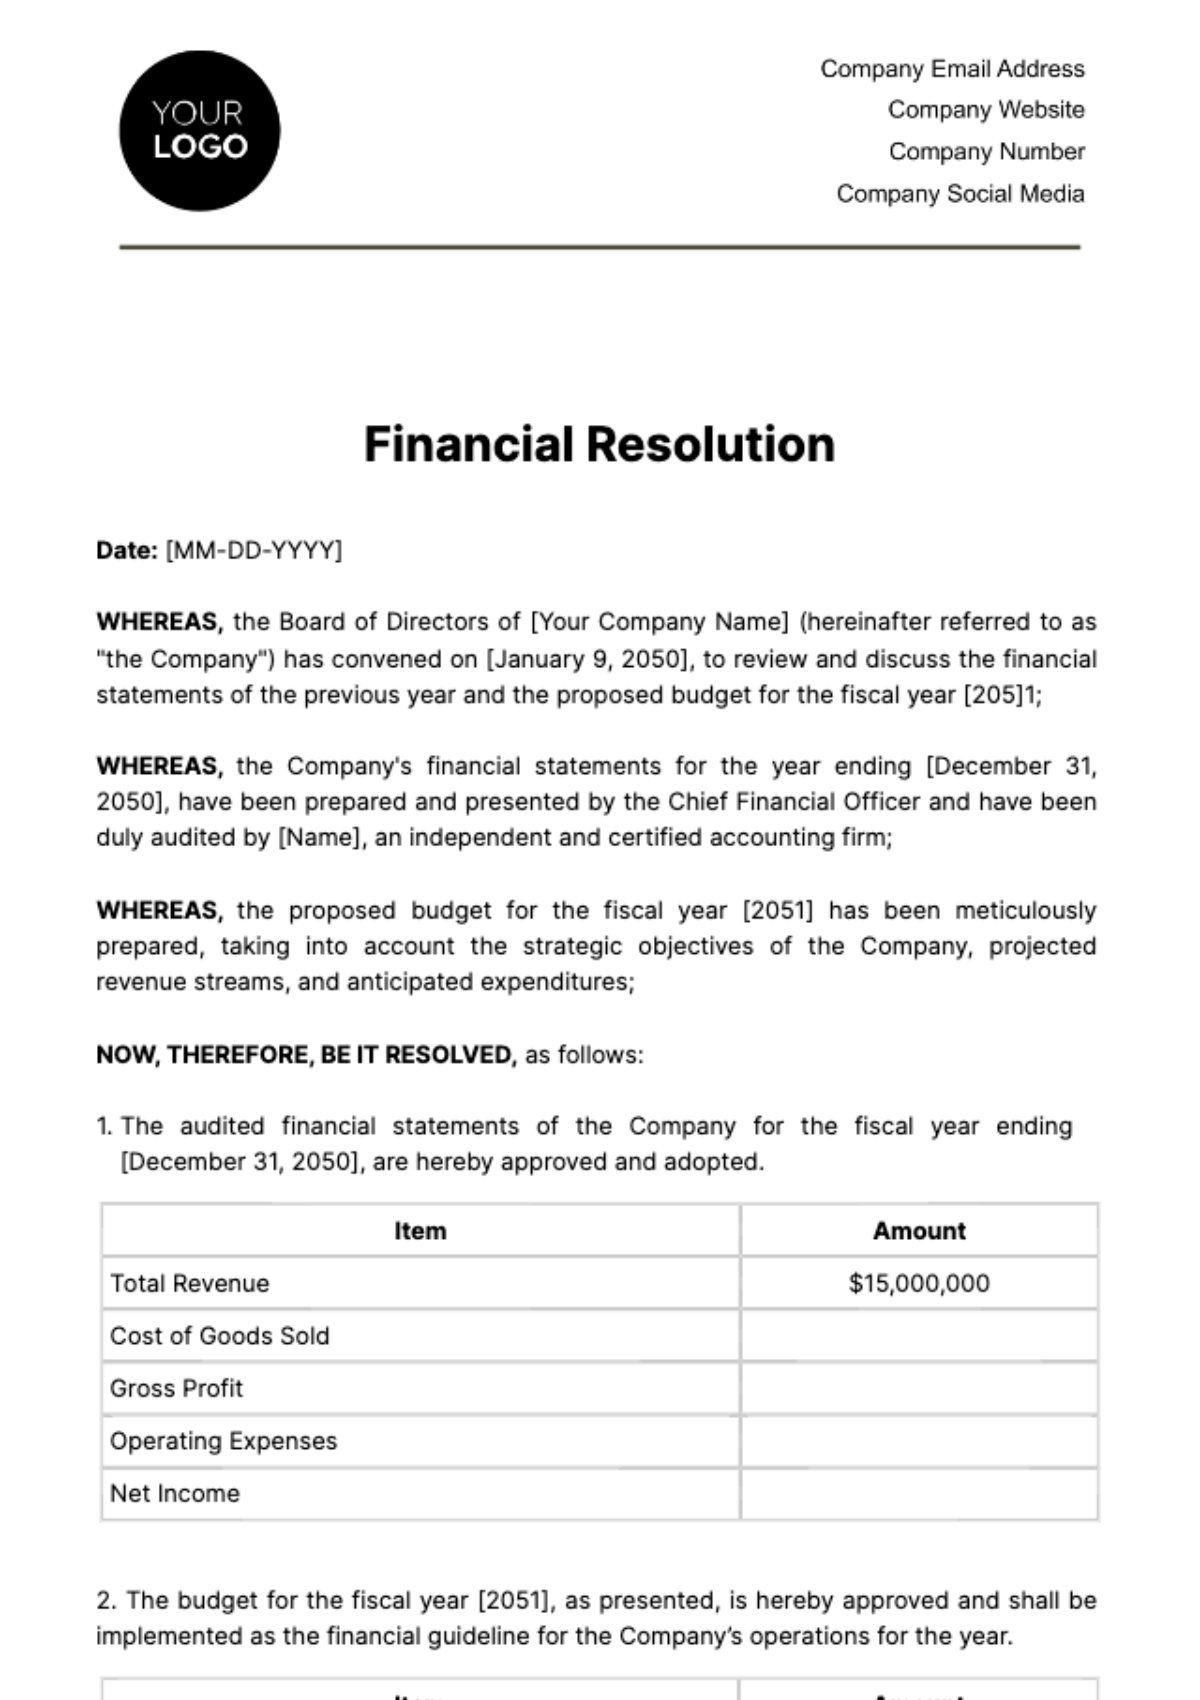 Free Financial Resolution Template